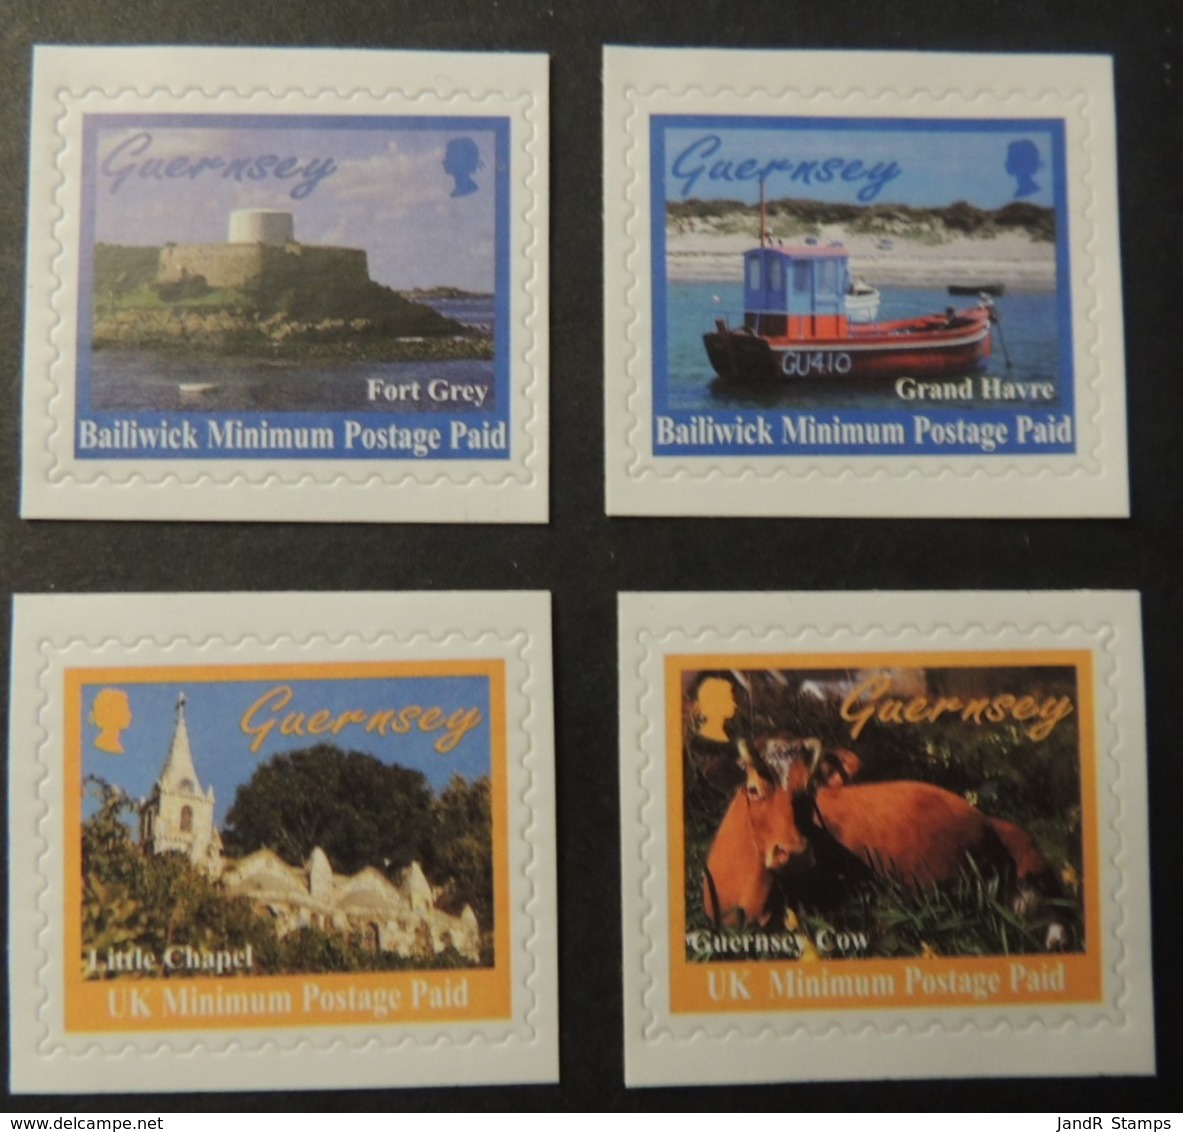 GUERNSEY 1998 SCENES SELF-ADHESIVE SG770-773 MNH 4 VALUES FORT GREY GRTAND HAVRE LITTLE CHAPEL COW BOVINE - Guernsey